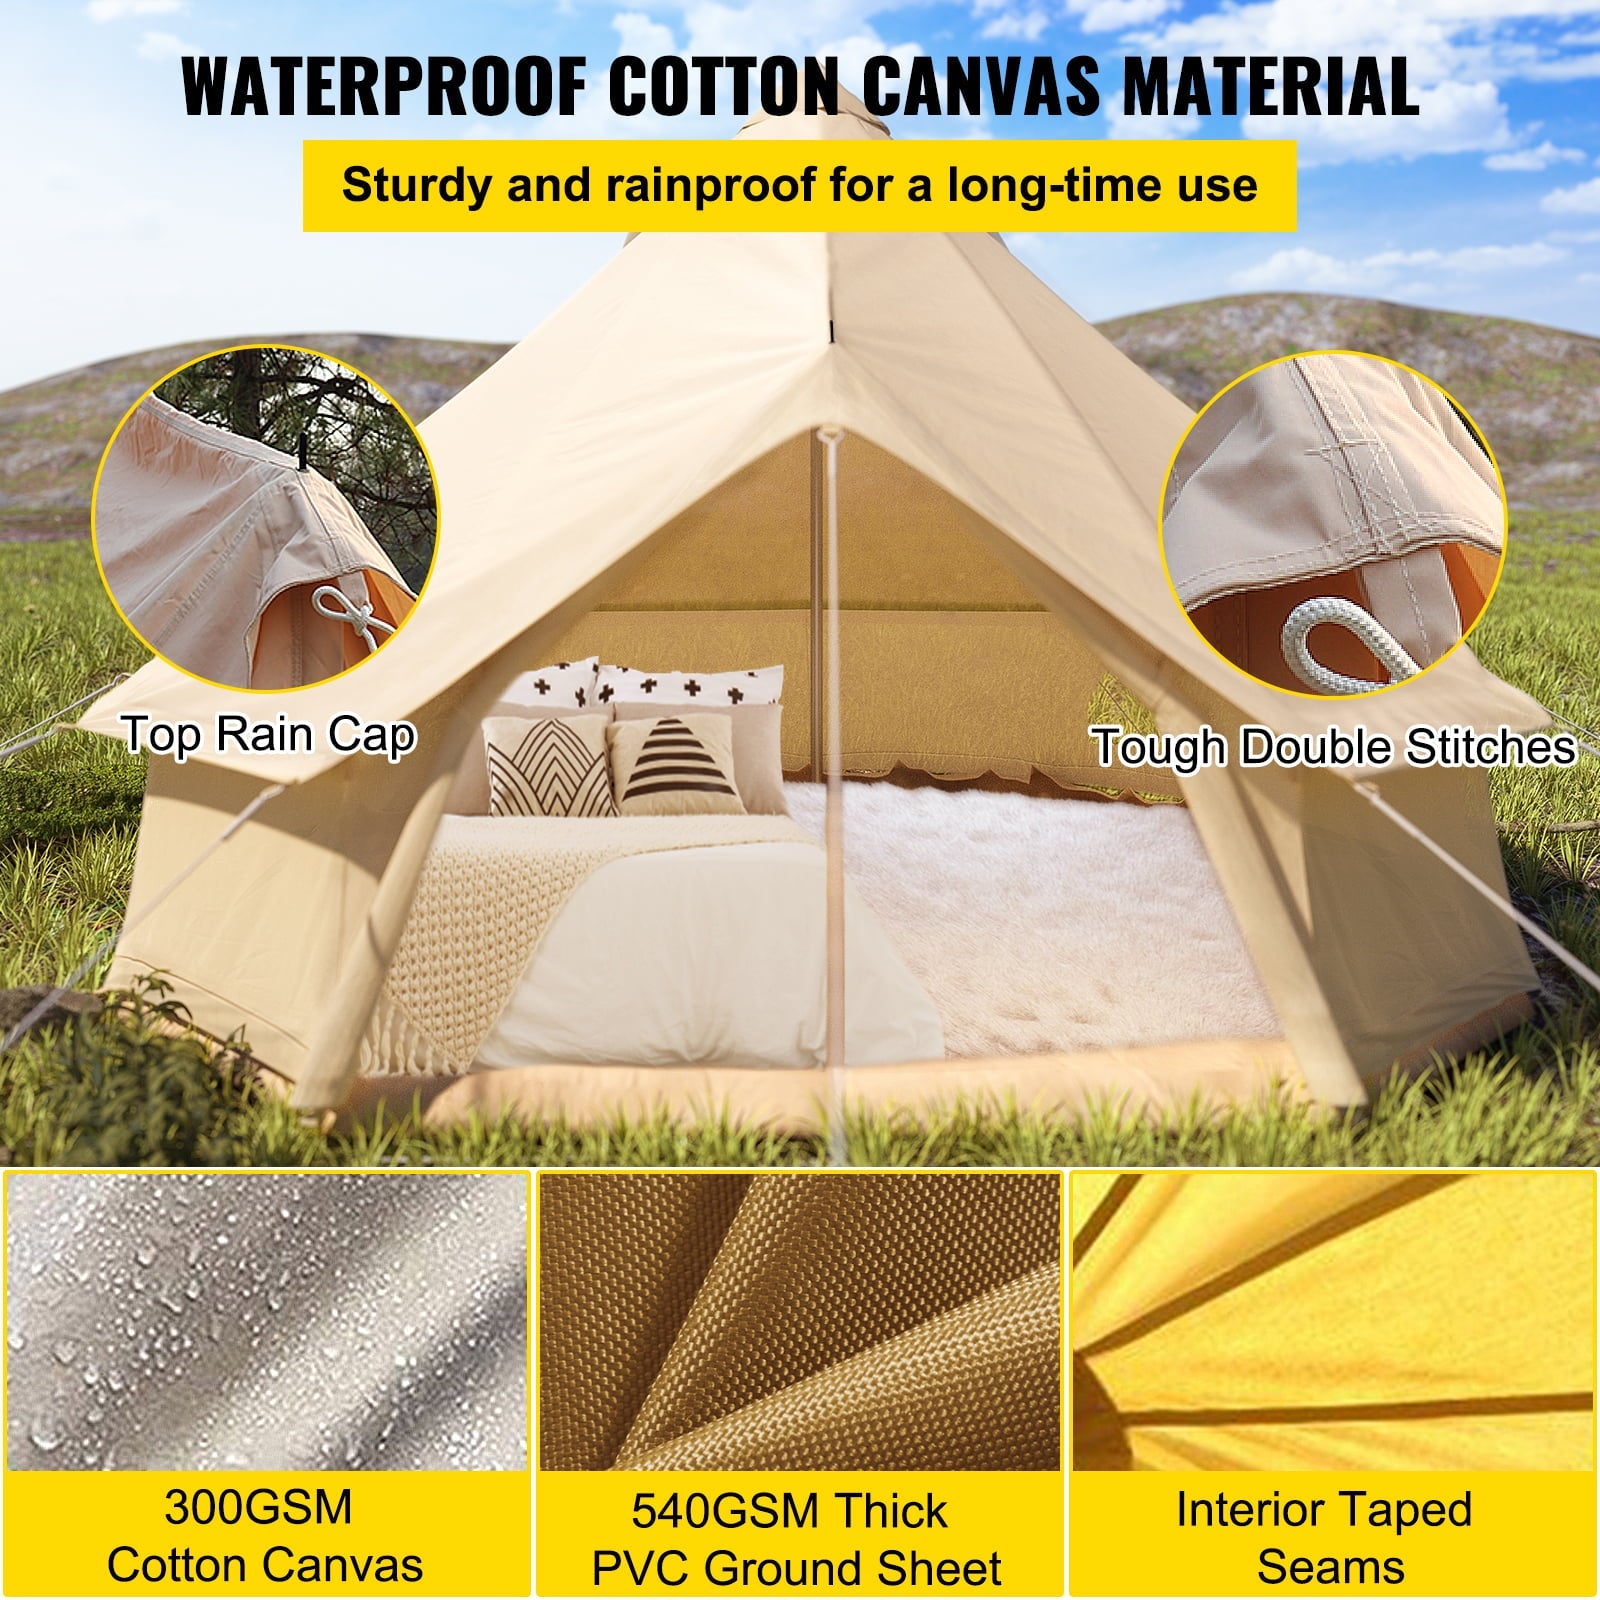 VEVORbrand Canvas Bell Tent 23ft Cotton Canvas Tent with Wall Stove Jacket Glamping Tent Waterproof Bell Tent for Family Camping Outdoor Hunting in 4 Seasons